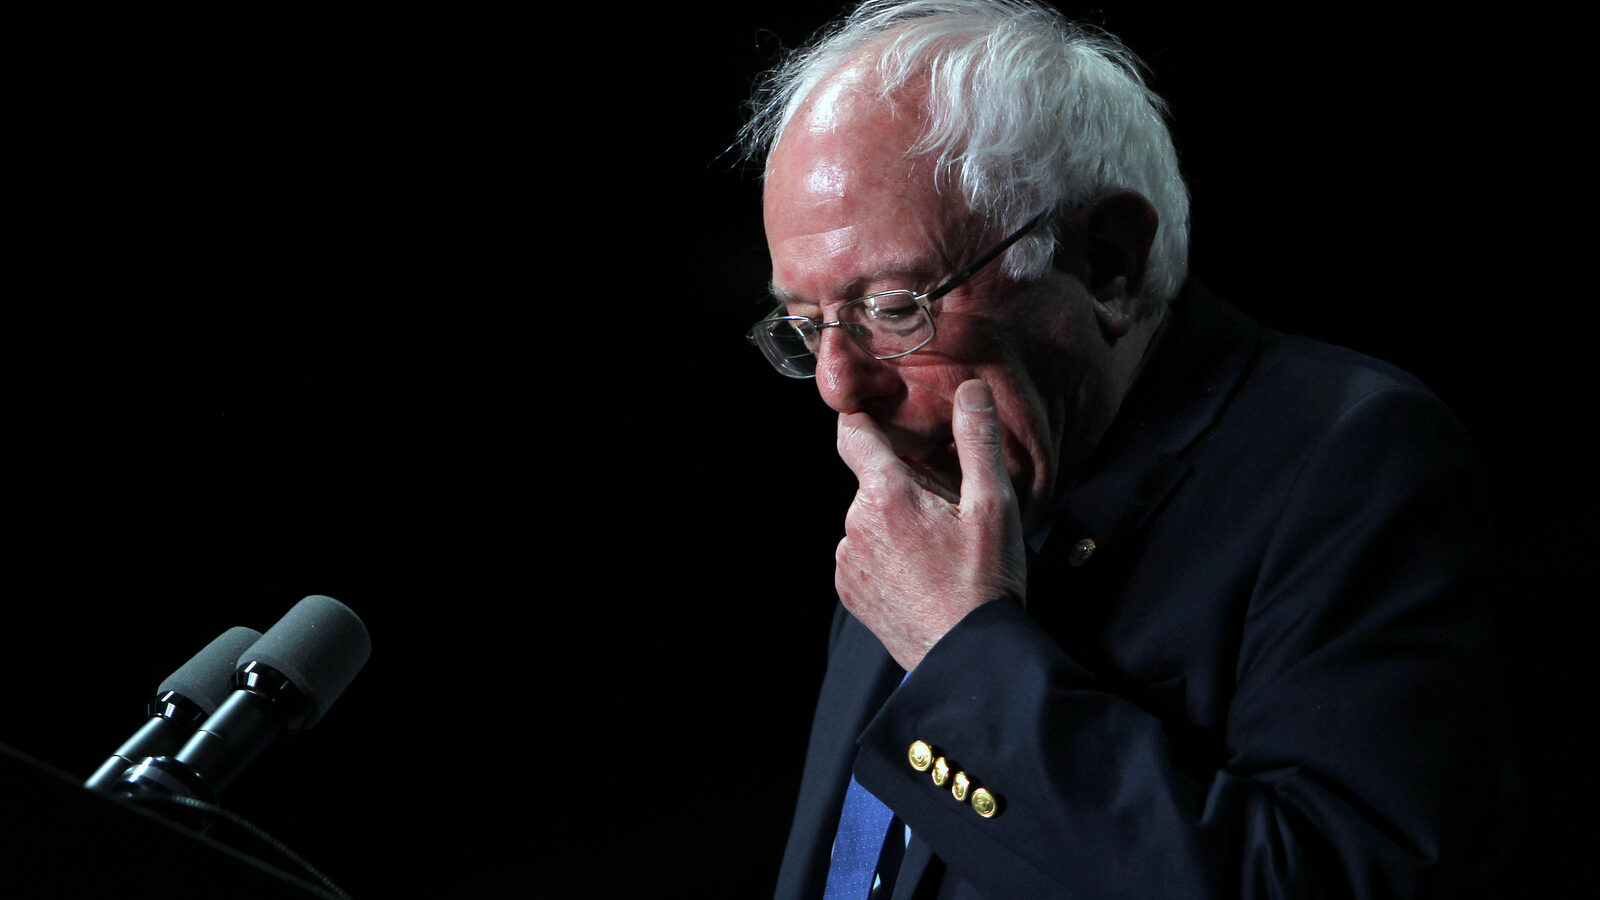 Democratic presidential candidate, Sen. Bernie Sanders, I-Vt., speaks at a campaign rally at the Phoenix Convention Center in Phoenix, Tuesday, March 15, 2016. (AP Photo/Ricardo Arduengo)